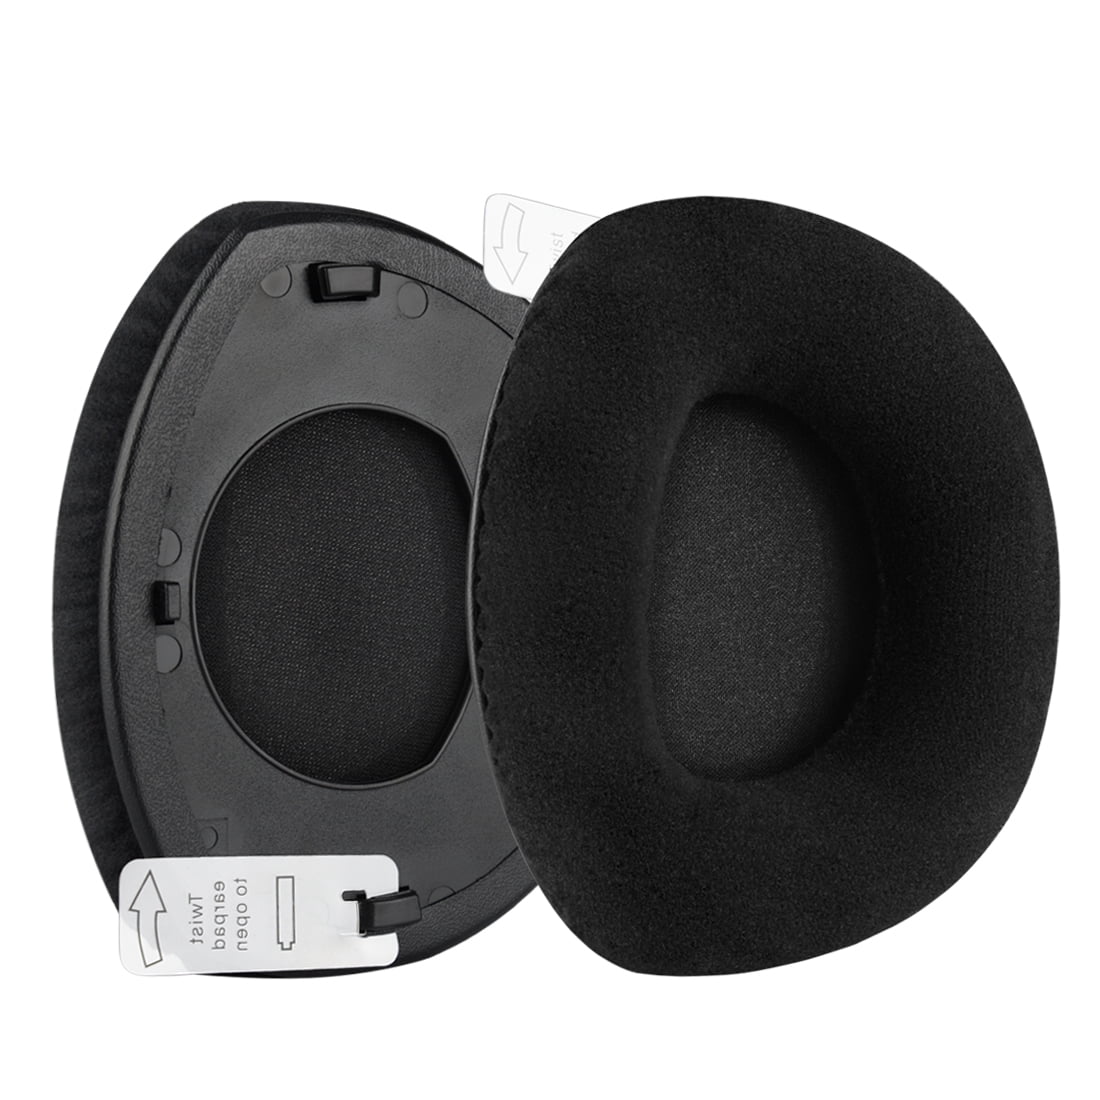 RS180 HDR170 Headphones Earpads Headset Ear Cushion Repair Parts RS170 HDR180 HDR160 Replacement Ear Pads for Sennheiser RS160 